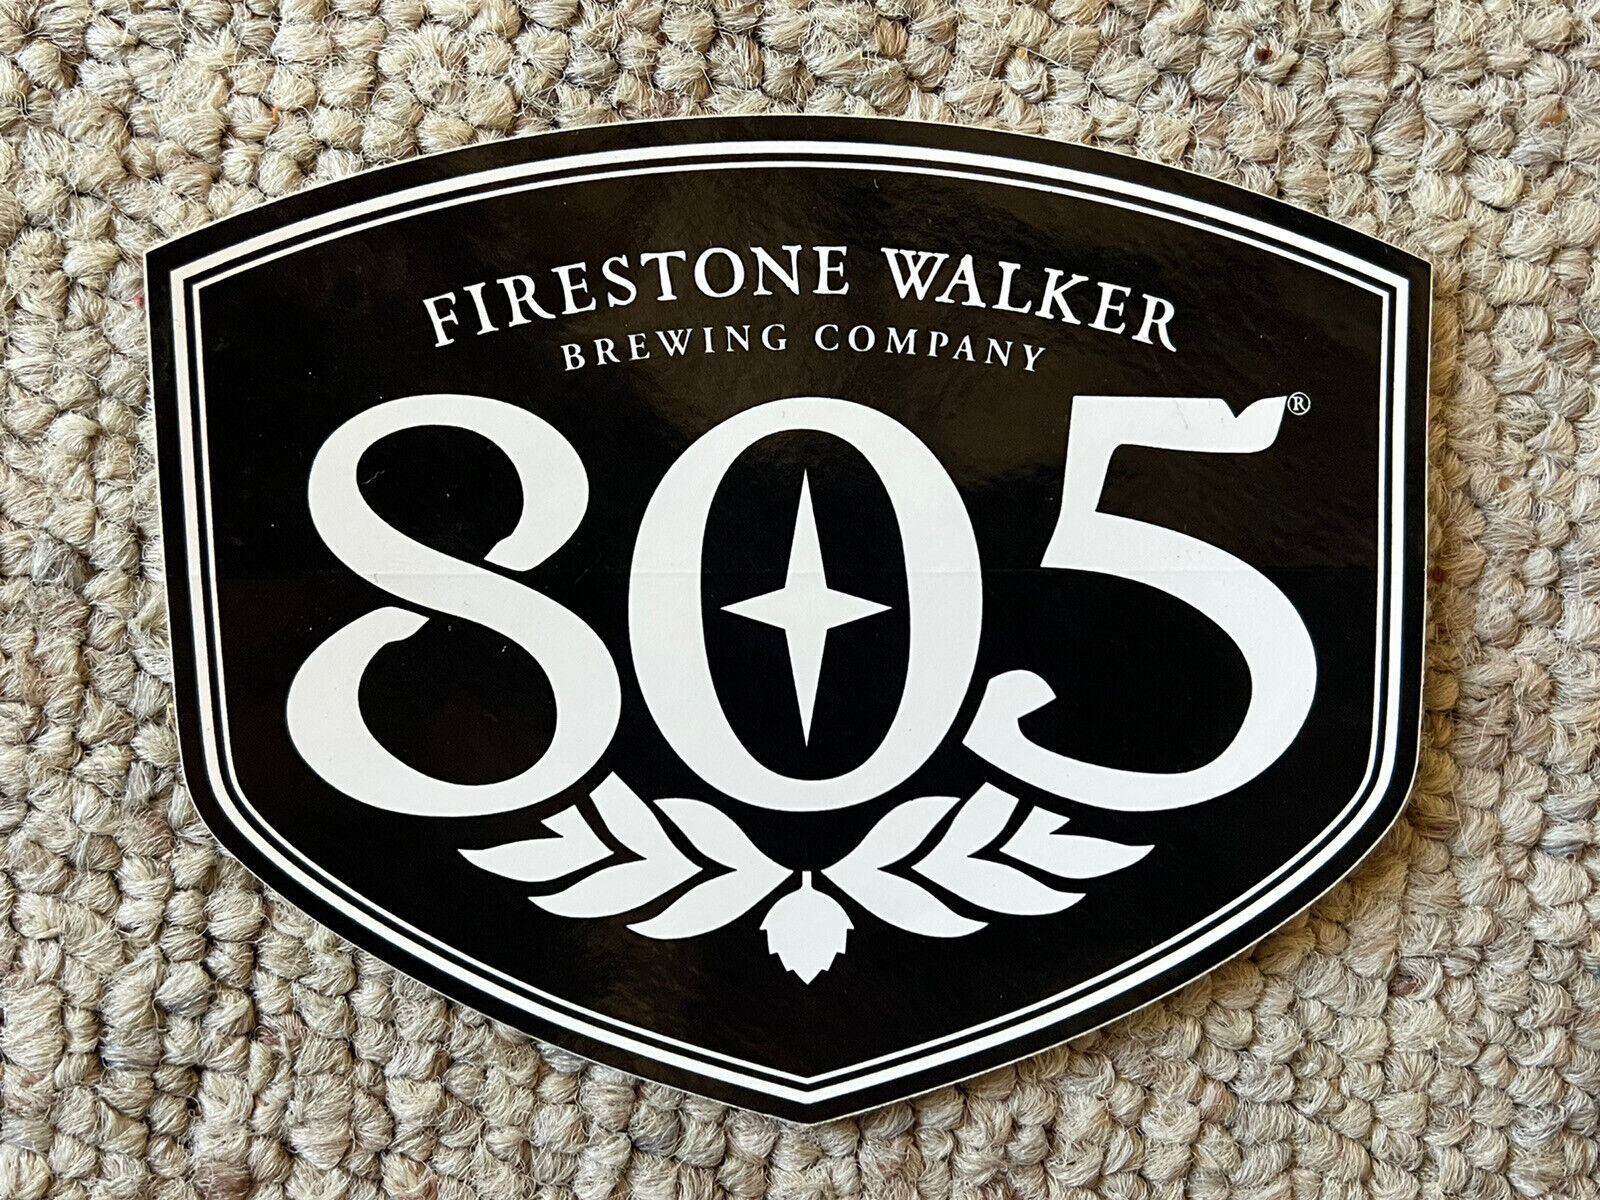 Firestone Walker 805 Beer Sticker Decal (With Text) 4.5”x5.5” - WITH TRACKING